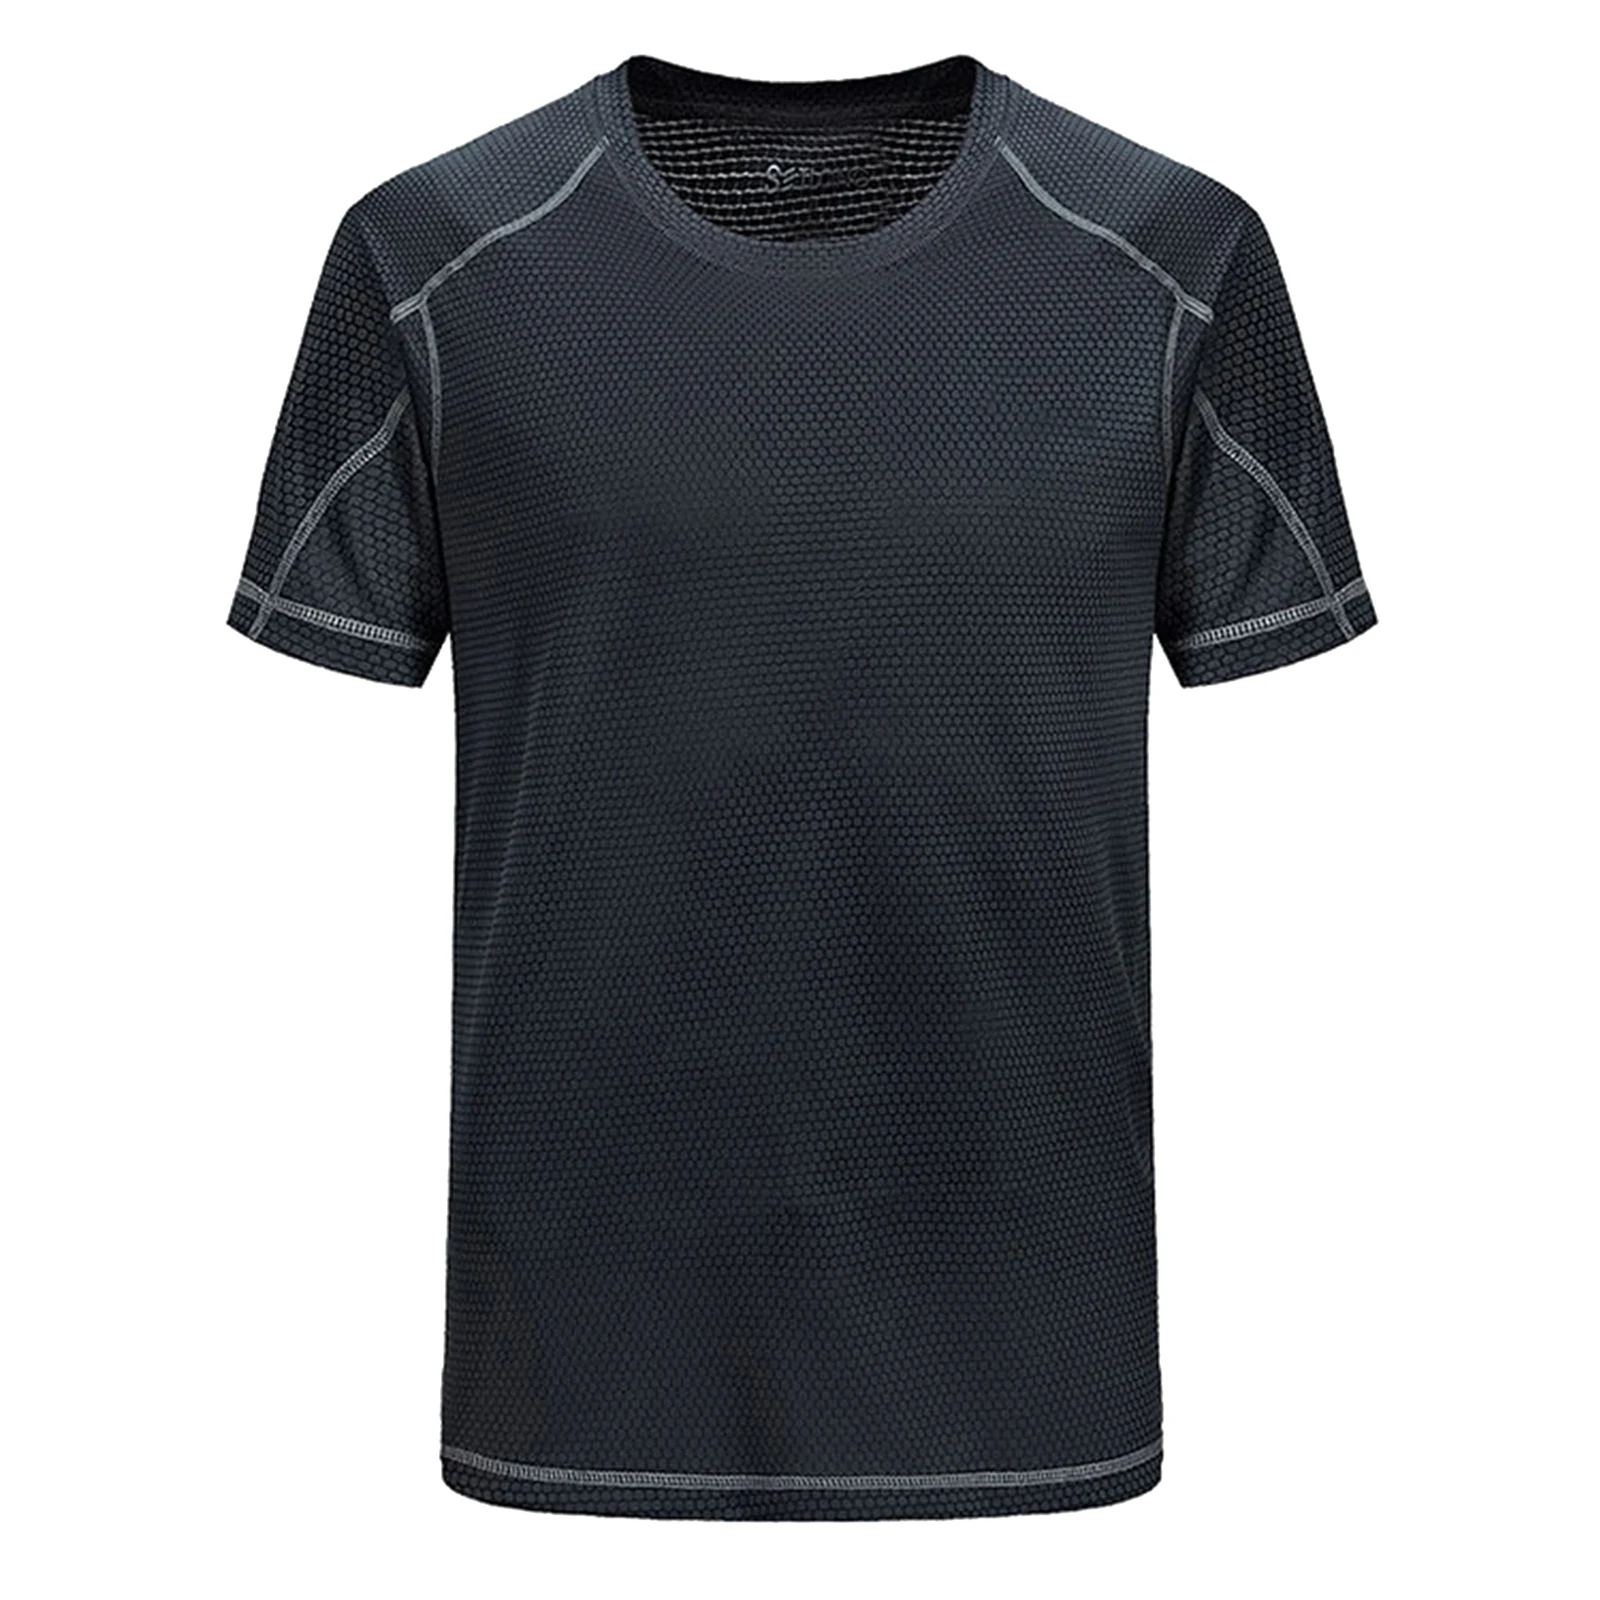 Men's Short Sleeve T-Shirt Breathable Ice-silk Quick Dry Athletic Running Workout Fishing Top Tee Performance Shirts